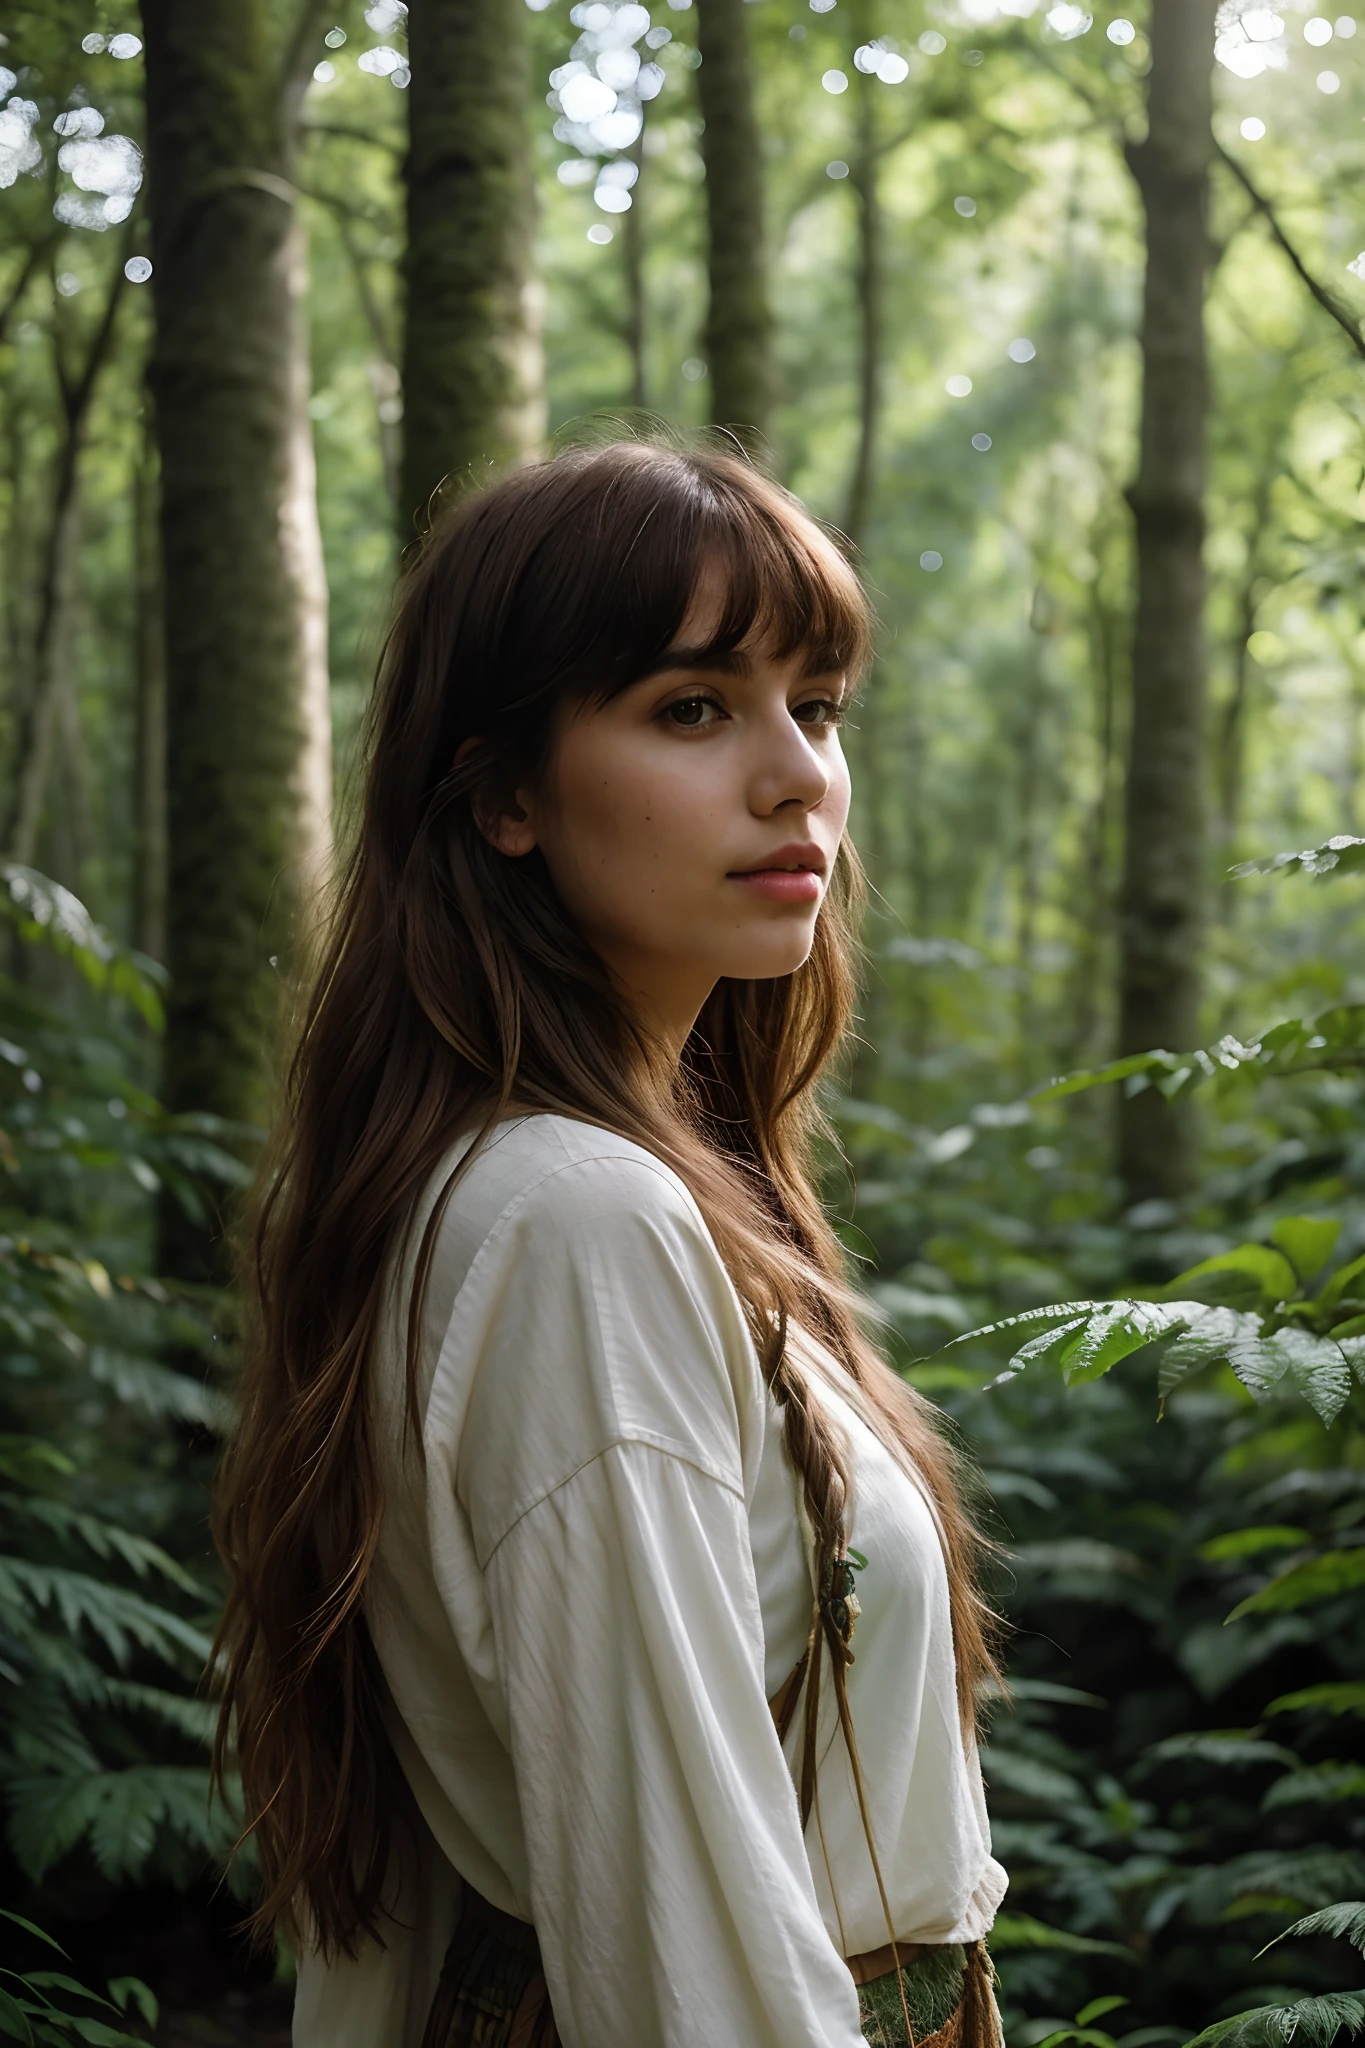 RAW photo, An Instagram model in a picturesque forest, dressed in boho-chic attire, Bangs with layers, Two-tone hair color, surrounded by lush greenery and sunlight filtering through the trees, embracing the serenity of nature, documentary photography, creative shadow play, detailed skin, skin blemish,